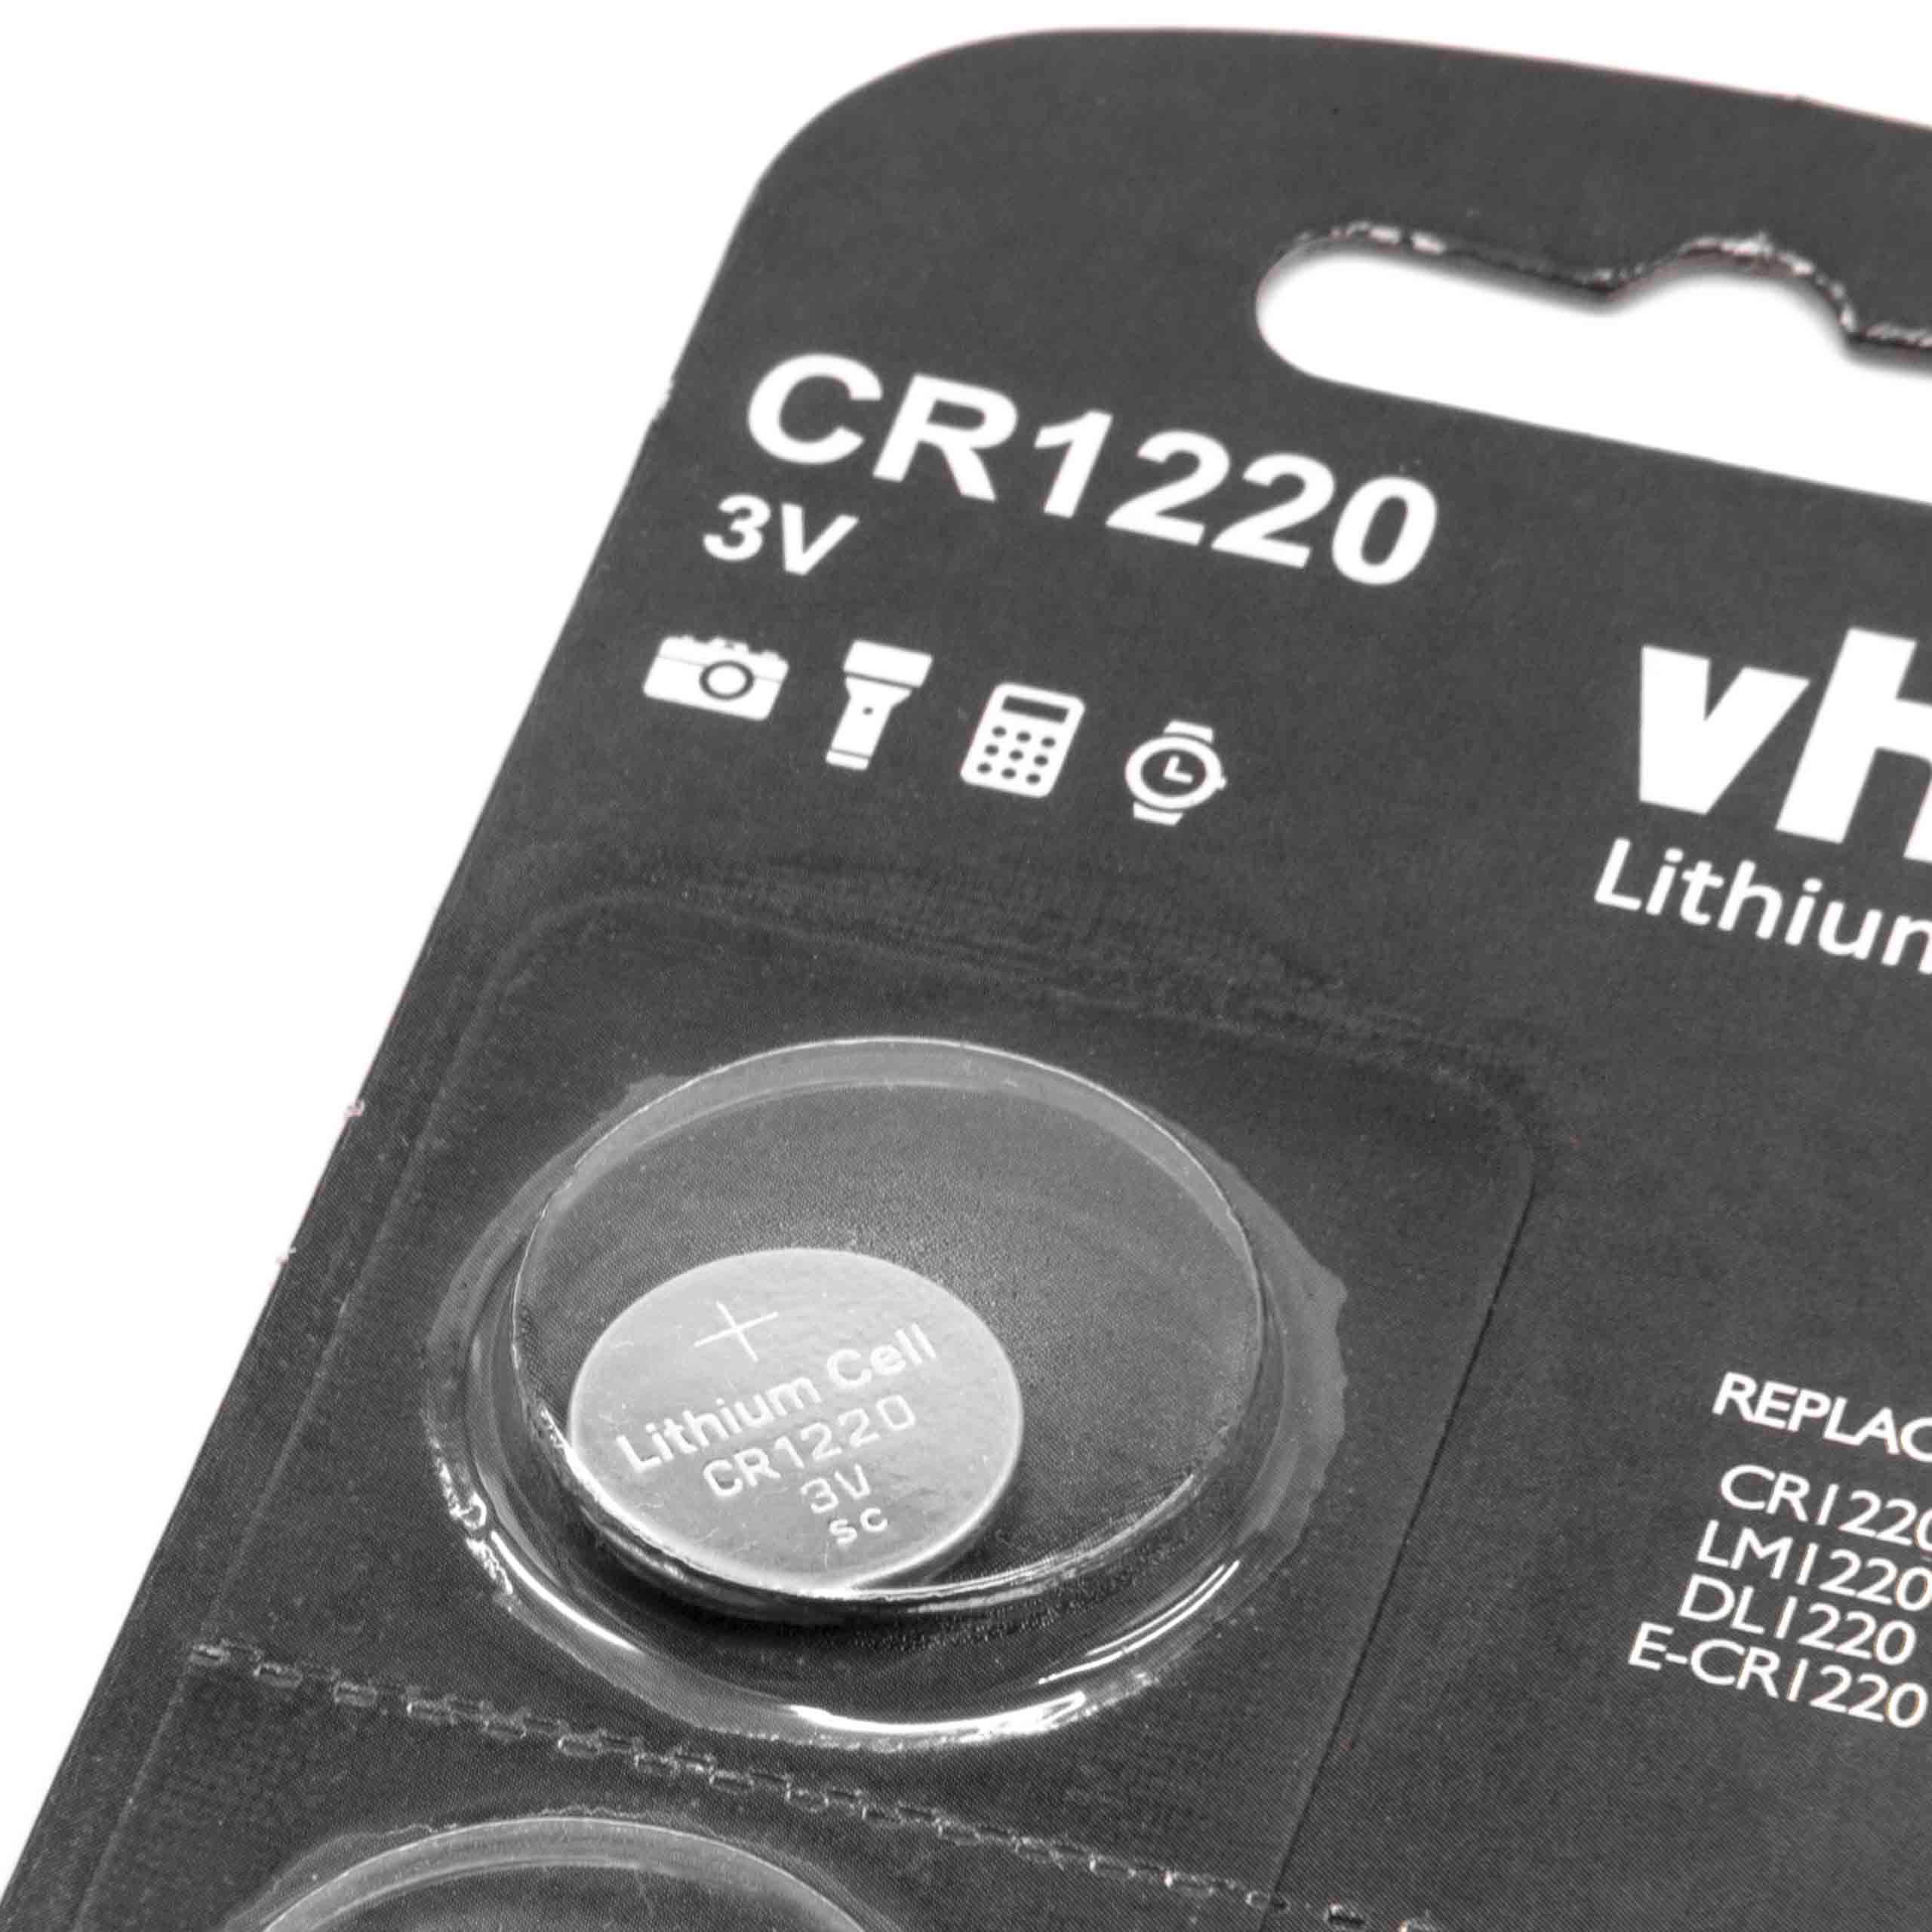 20x 3 V Li-Ion Button Coin Cell Battery Type CR1220 suitable for Hearing Aids, Watches, Car Keys, Scales etc.